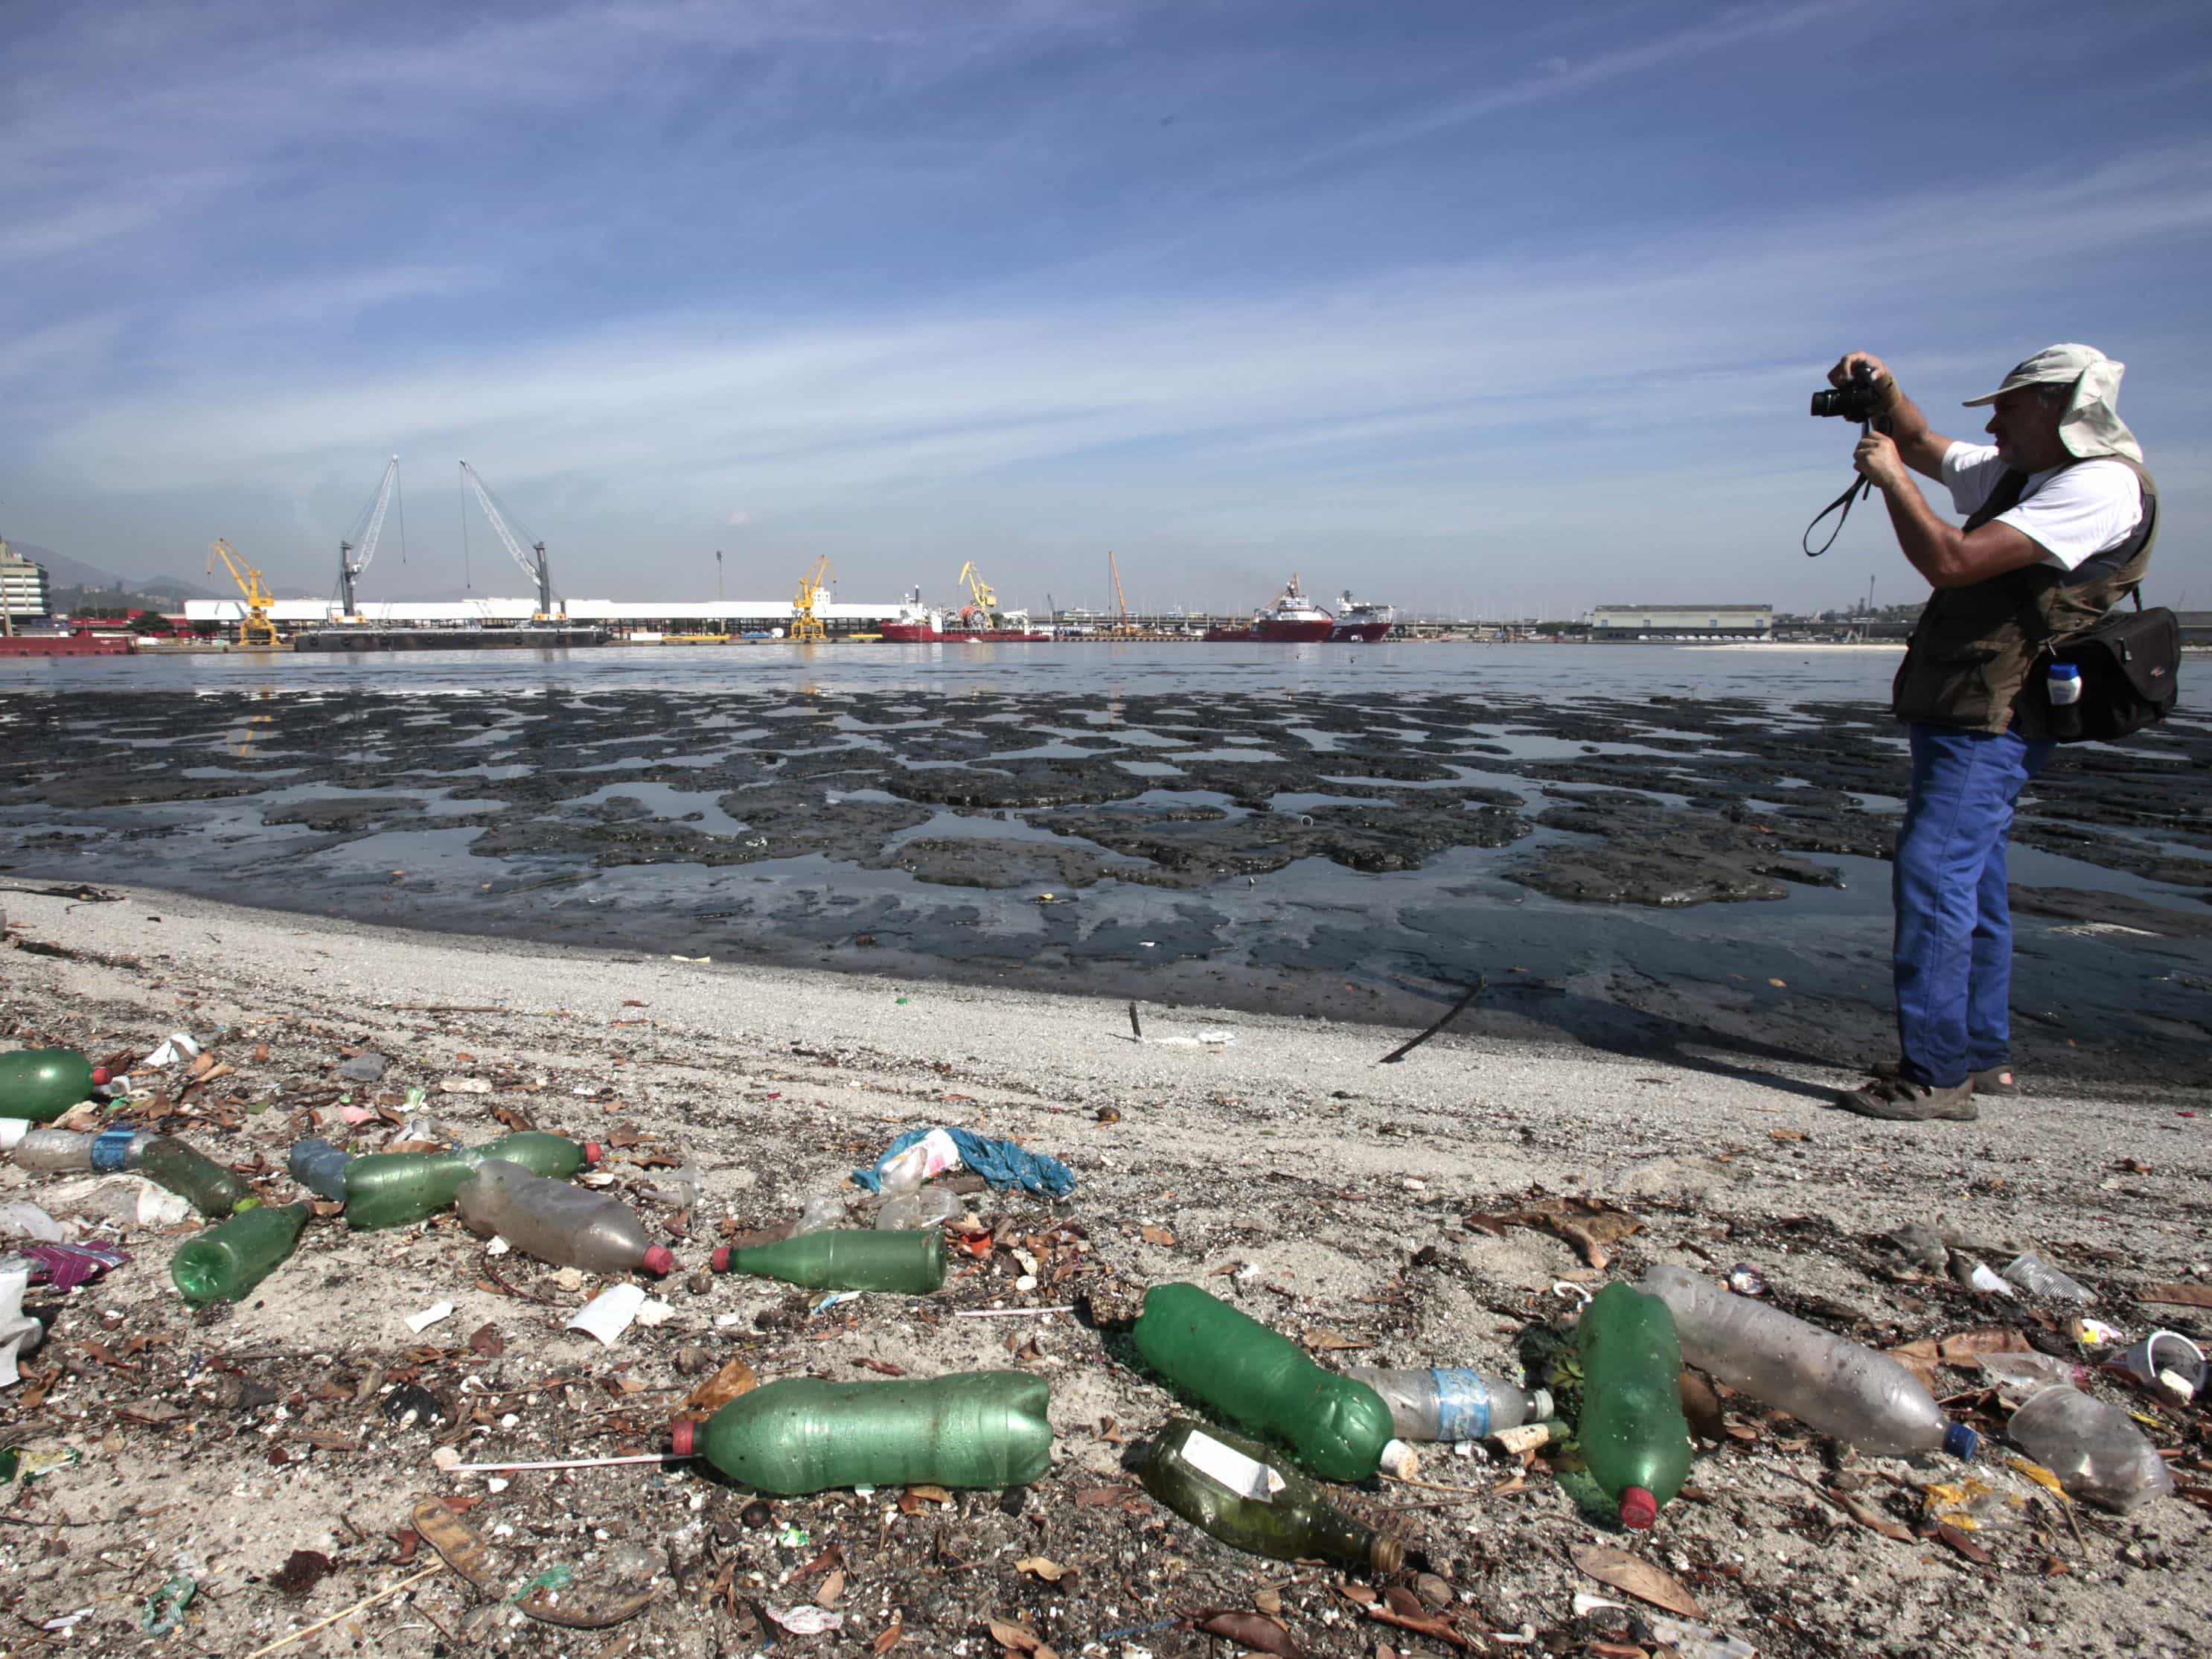 Brazilian biologist Mario Moscatelli takes pictures next to garbage in the Guanabara Bay in Rio de Janeiro, 12 March 2014, REUTERS/Sergio Moraes